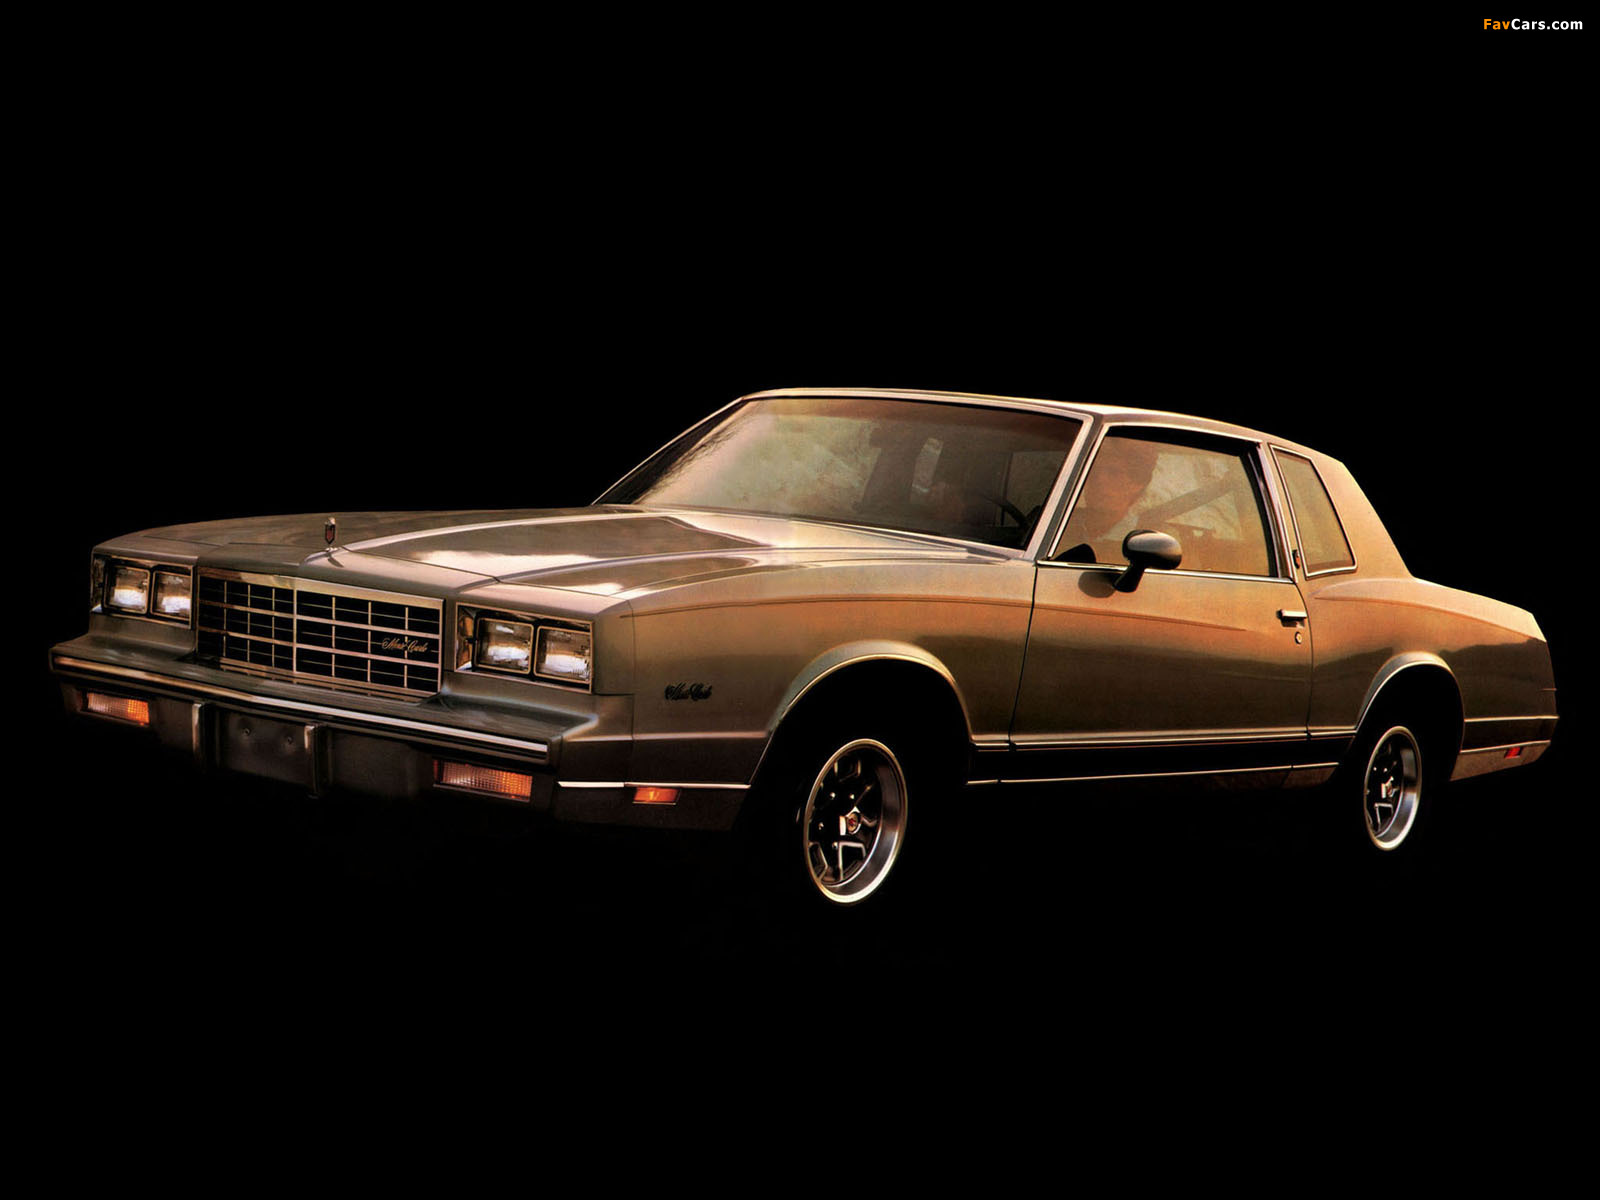 Chevrolet Monte Carlo Wallpapers